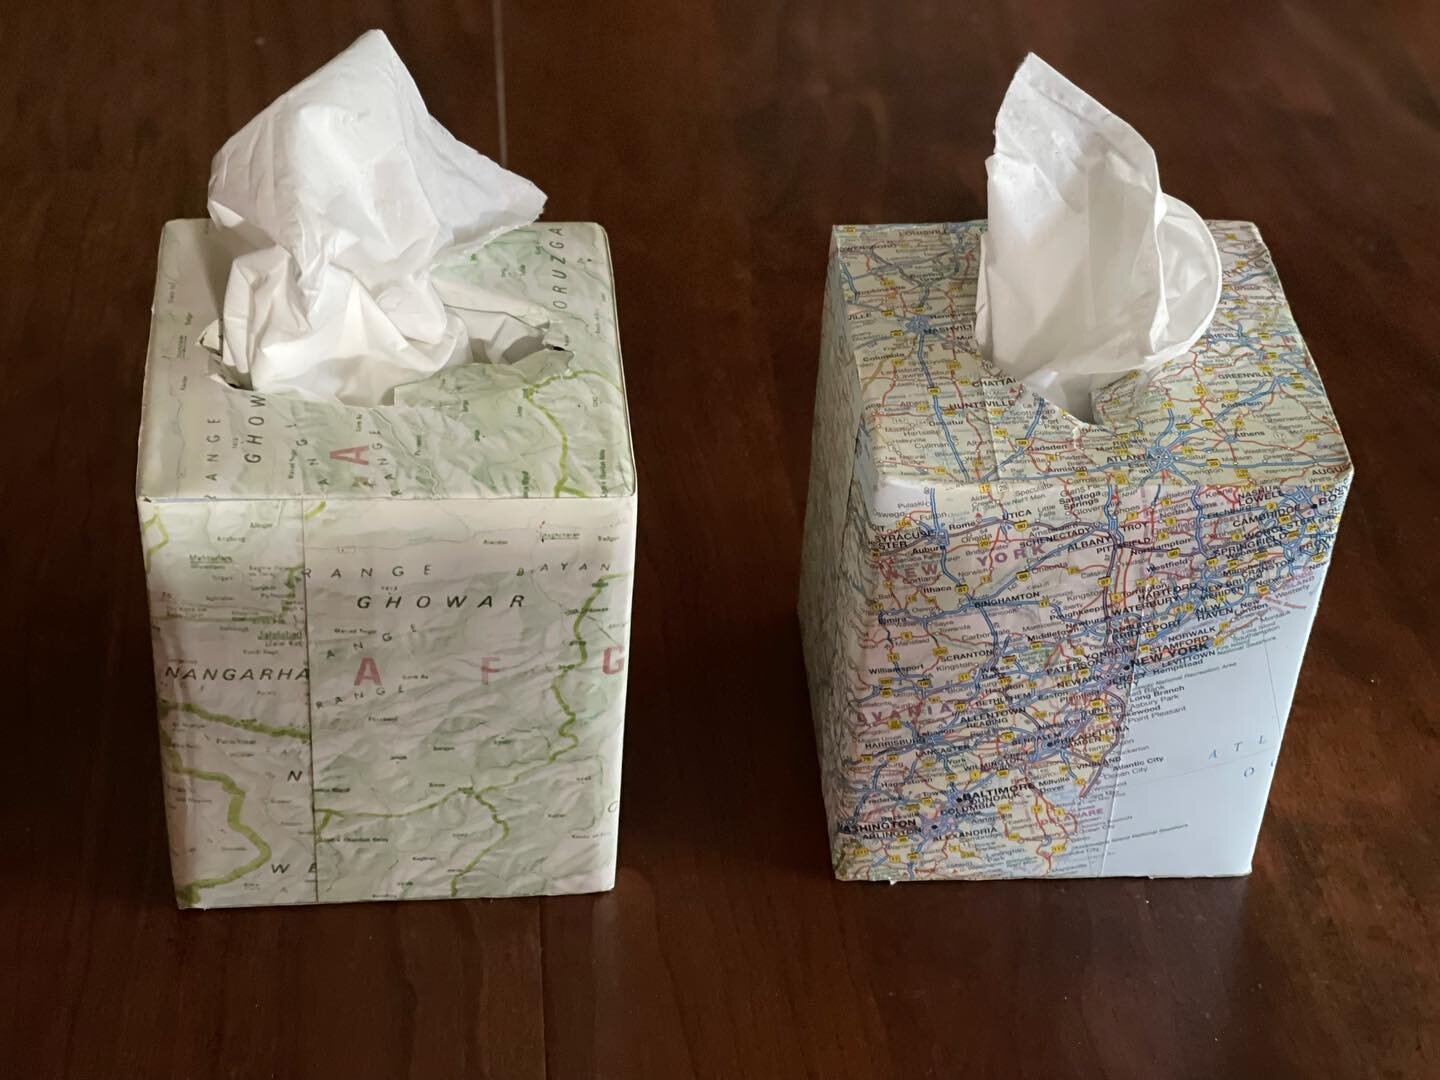 Remembering:  Two tissue boxes wrapped in maps of NYC and Afghanistan&mdash;this art was created twenty years ago by @christinepaulart as a response to September 11th by artists at @graceportland  #september11 #gracememorialepiscopalchurch  #cityands